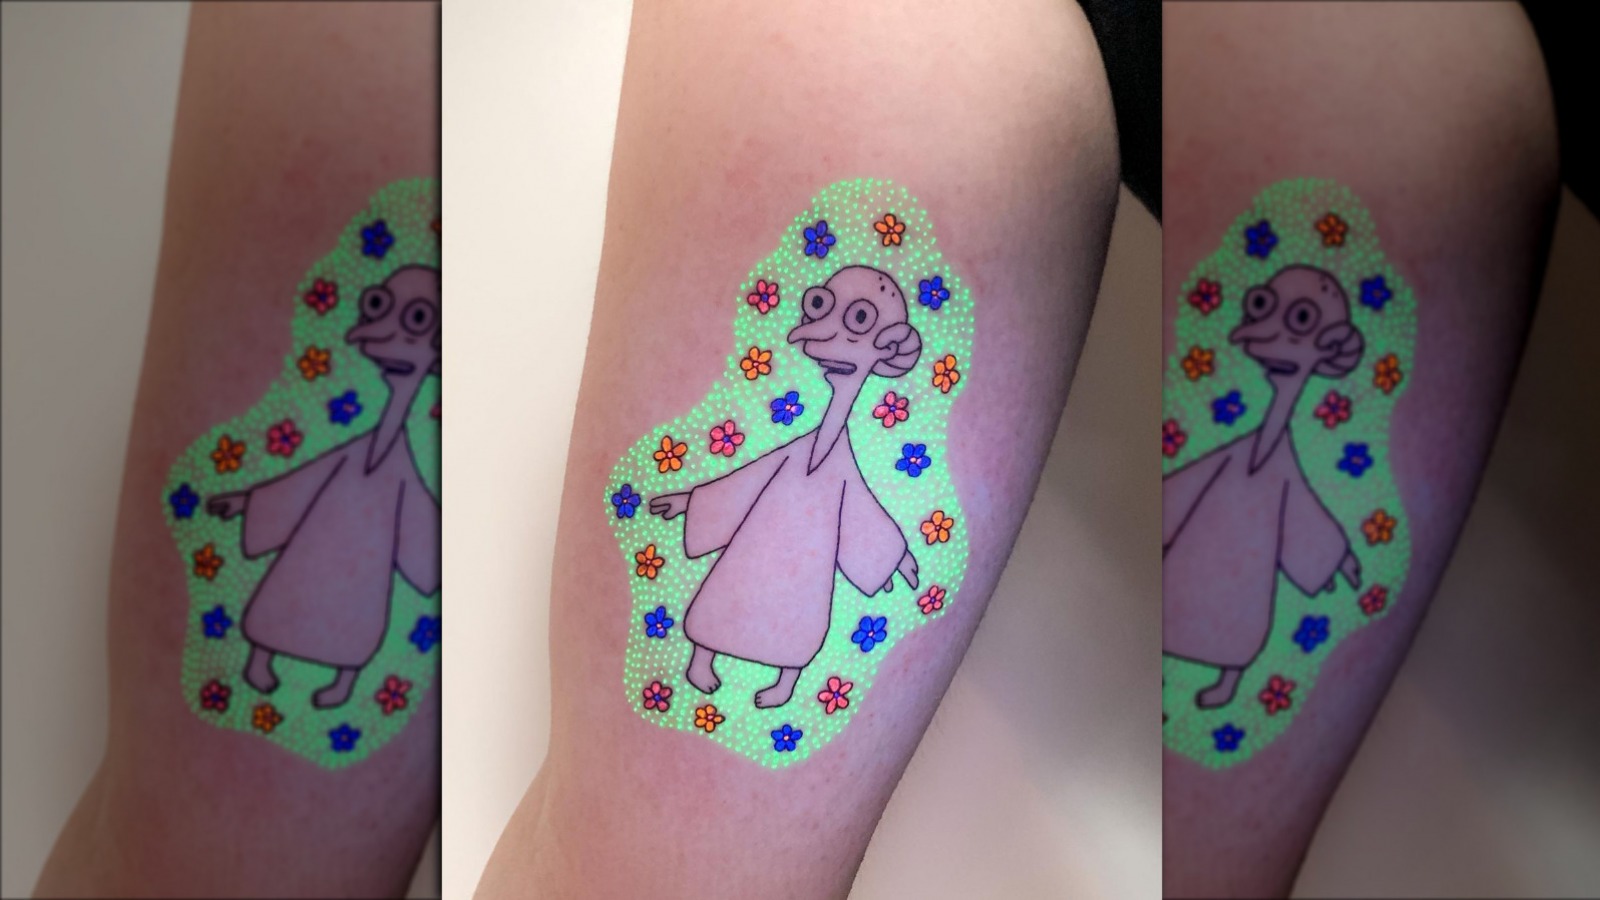 All You Need To Know About Black Light Tattoos, According to